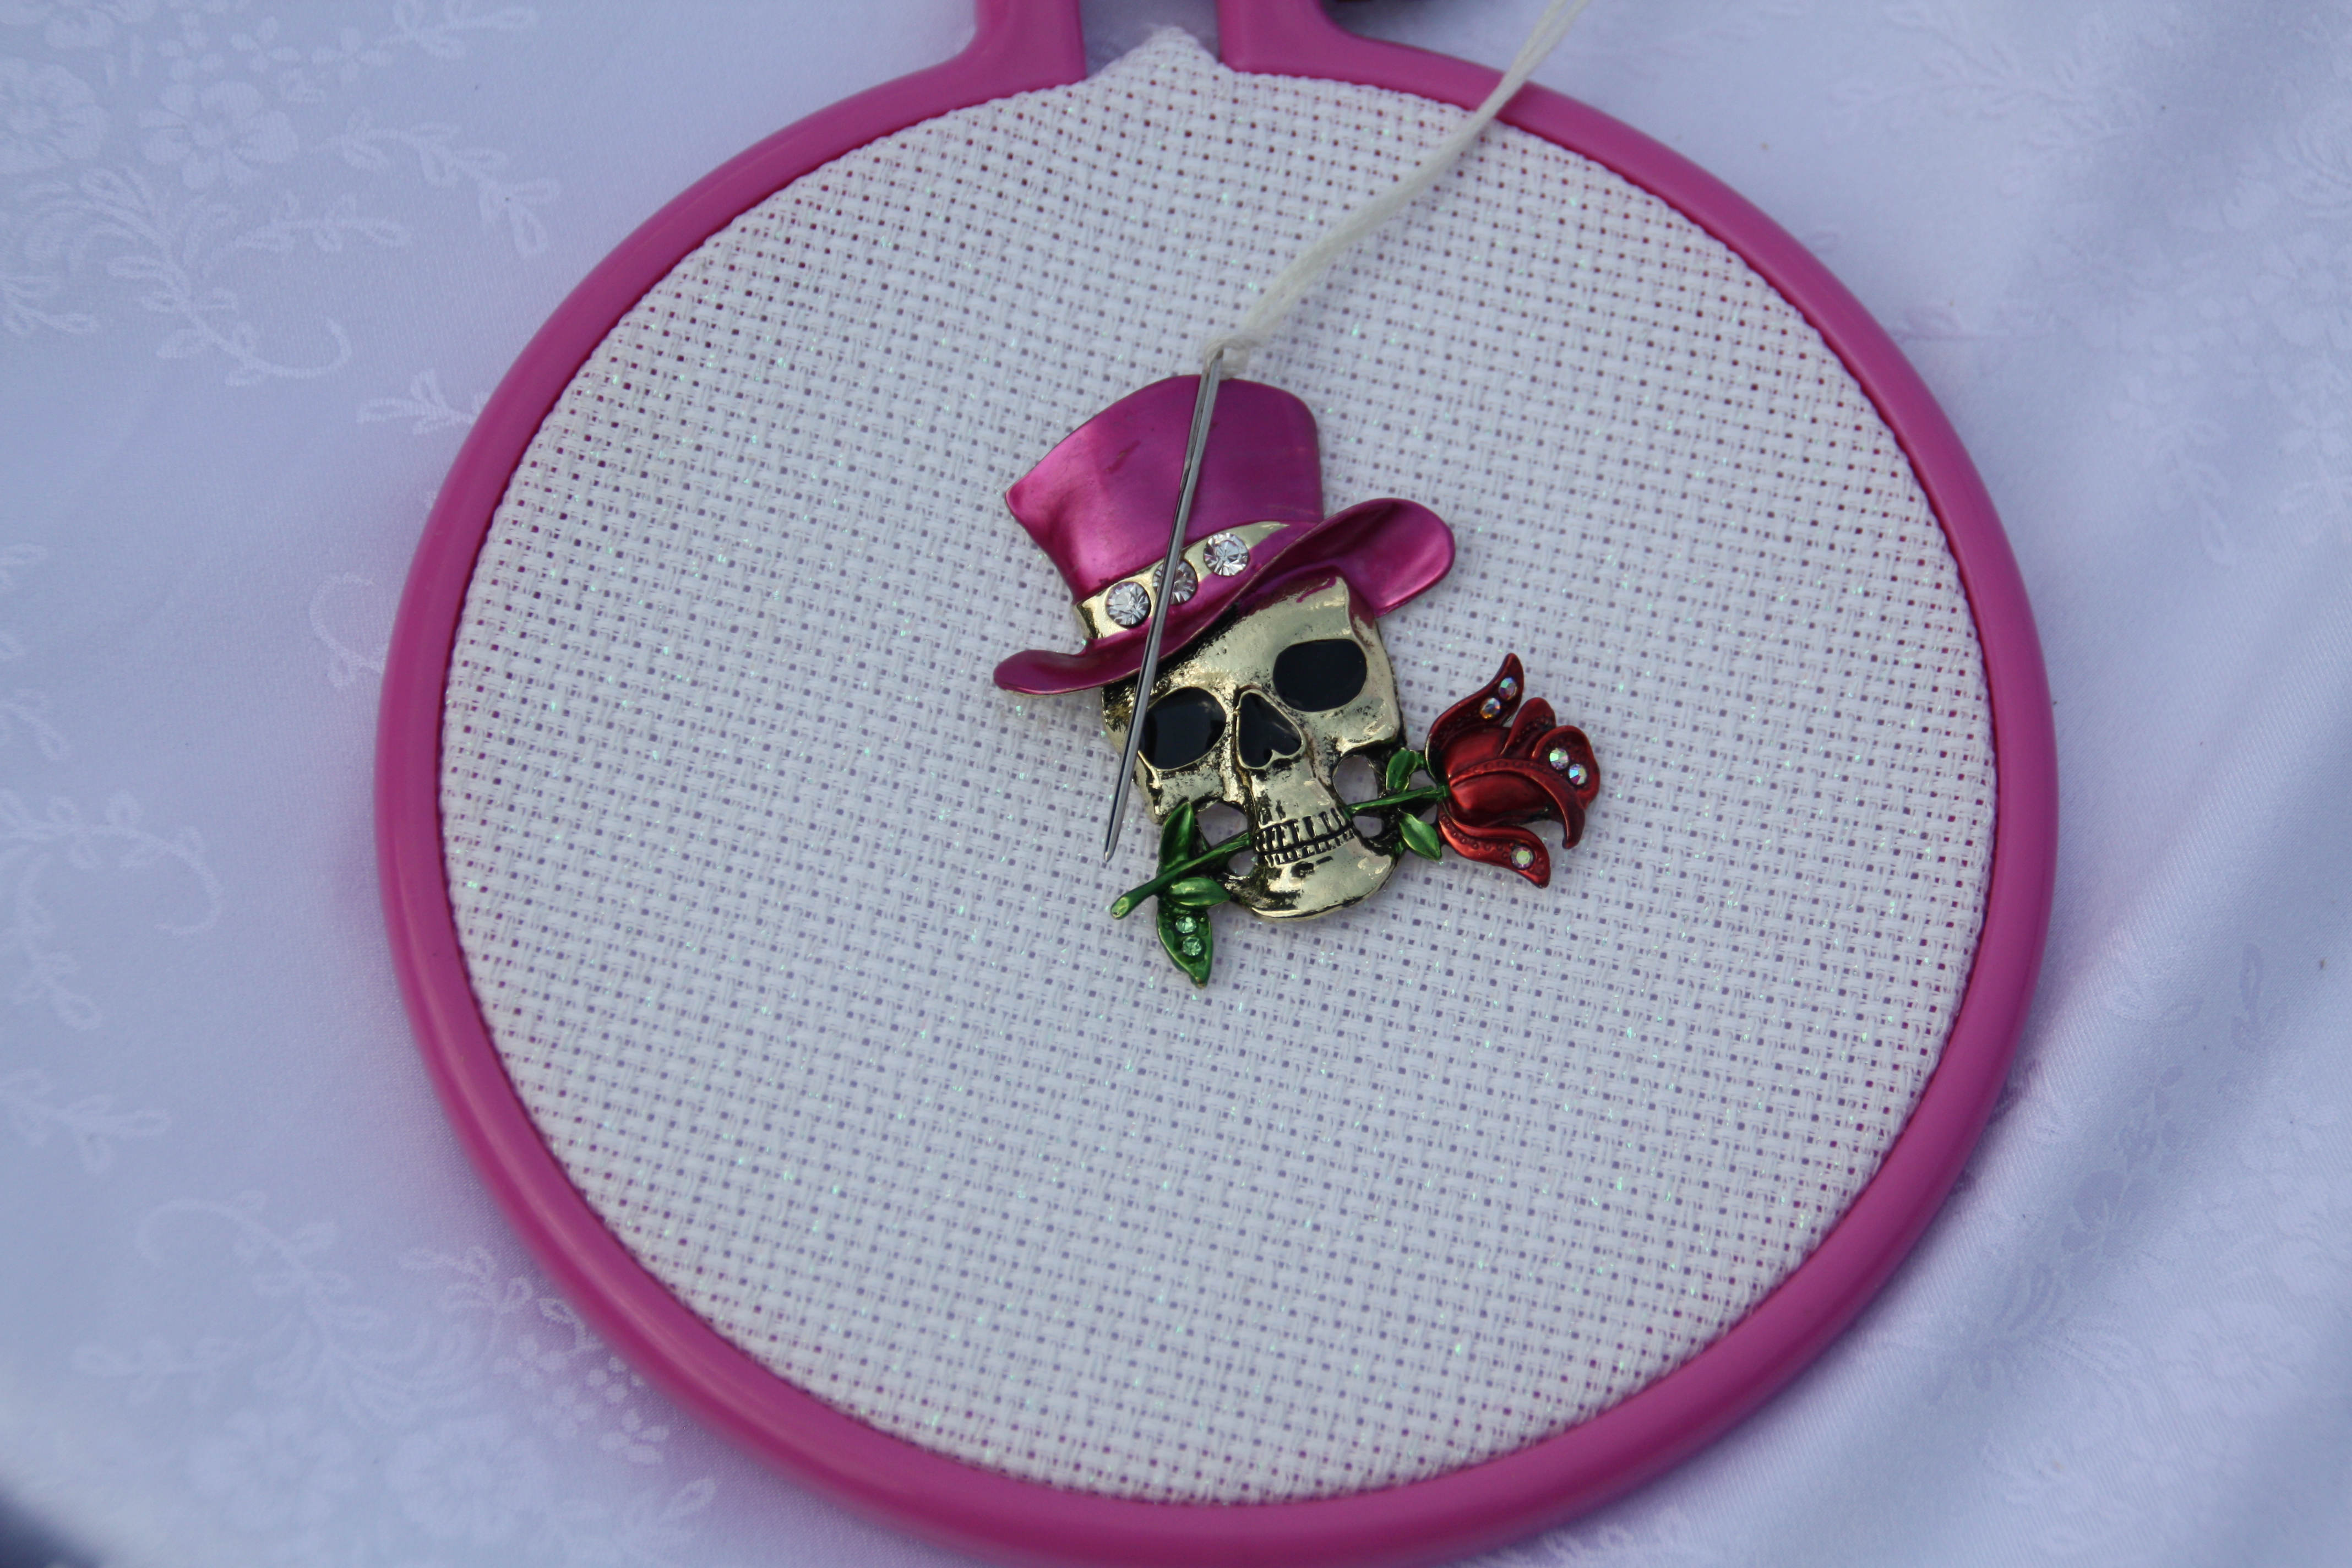 Pretty Creepy Needle Minder Magnetic for Cross Stitch, Embroidery, or  Creepy Decorative Magnet - Pretty Needle Minder